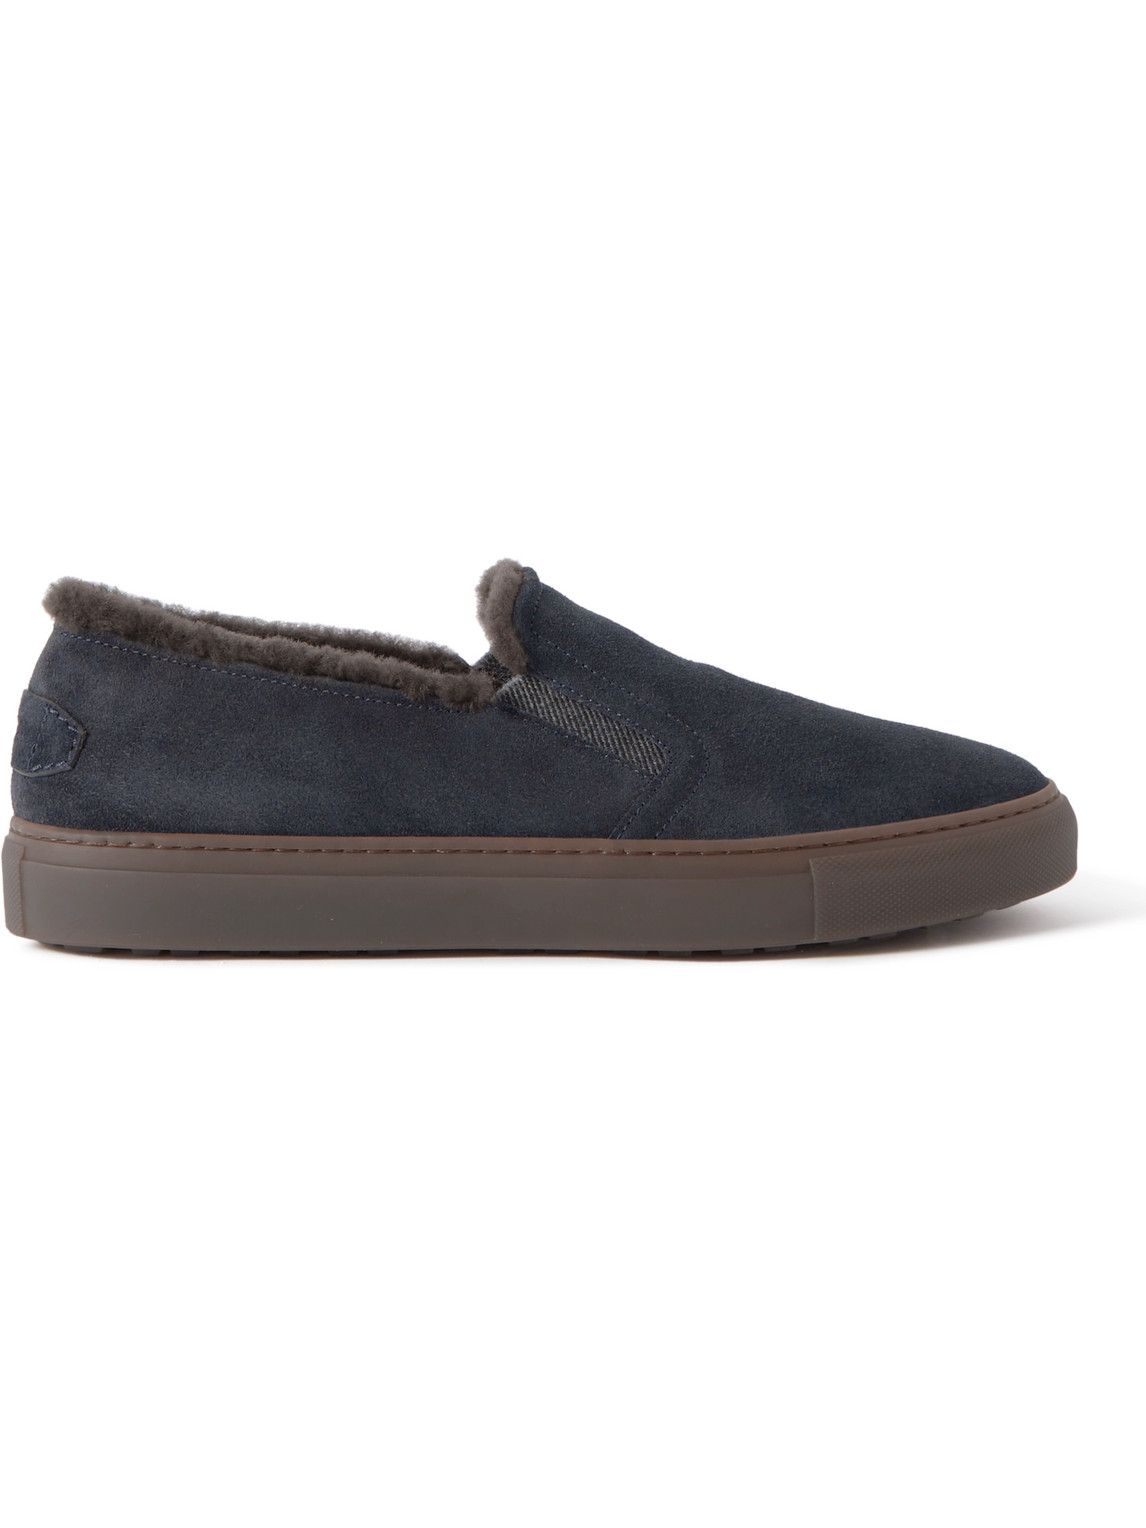 BRIONI SHEARLING-LINED SUEDE SLIP-ON SNEAKERS